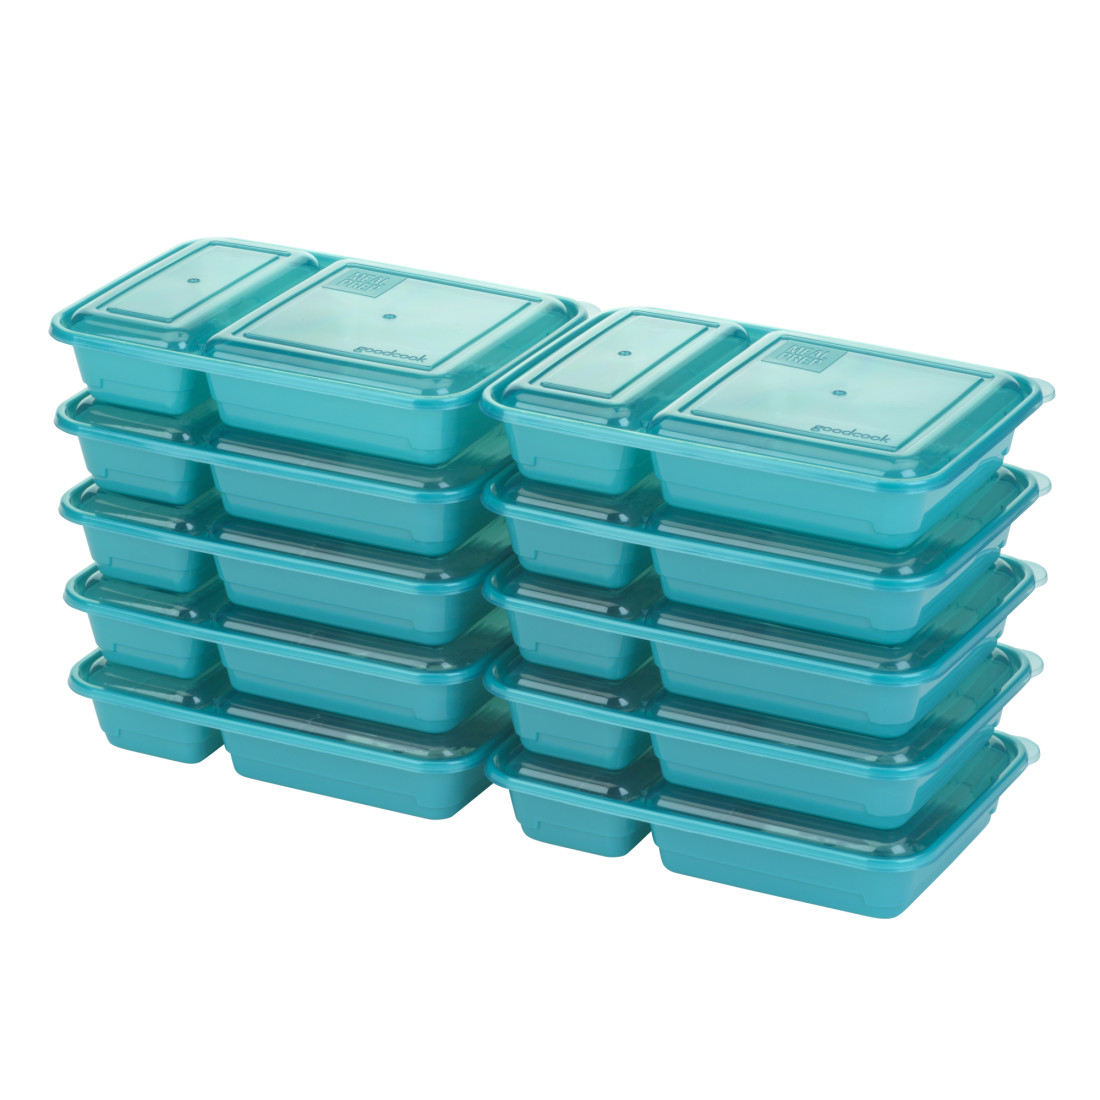 Kitcheniva Microwavable Meal Prep Food Container WIth 2